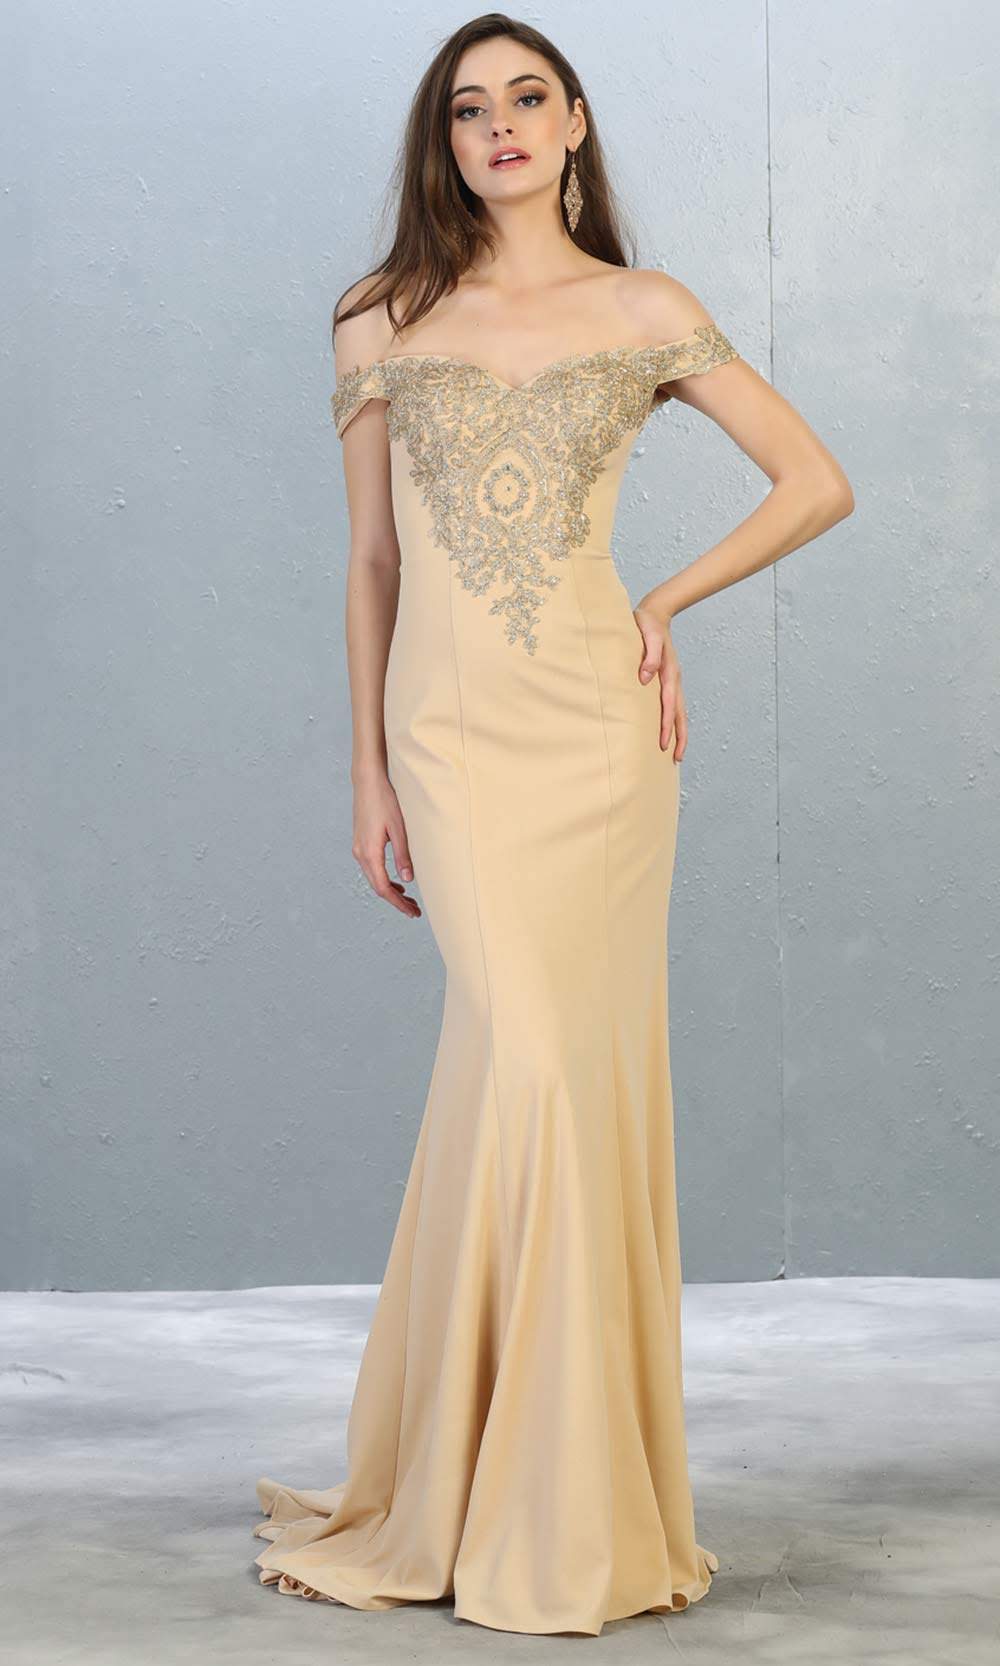 Mayqueen Mq1640 long champagne off shoulder dress w/train. This light gold evening dress is perfect for prom, engagement dress, formal wedding party, wedding reception dress, indowestern gown. Plus sizes are available.jpg